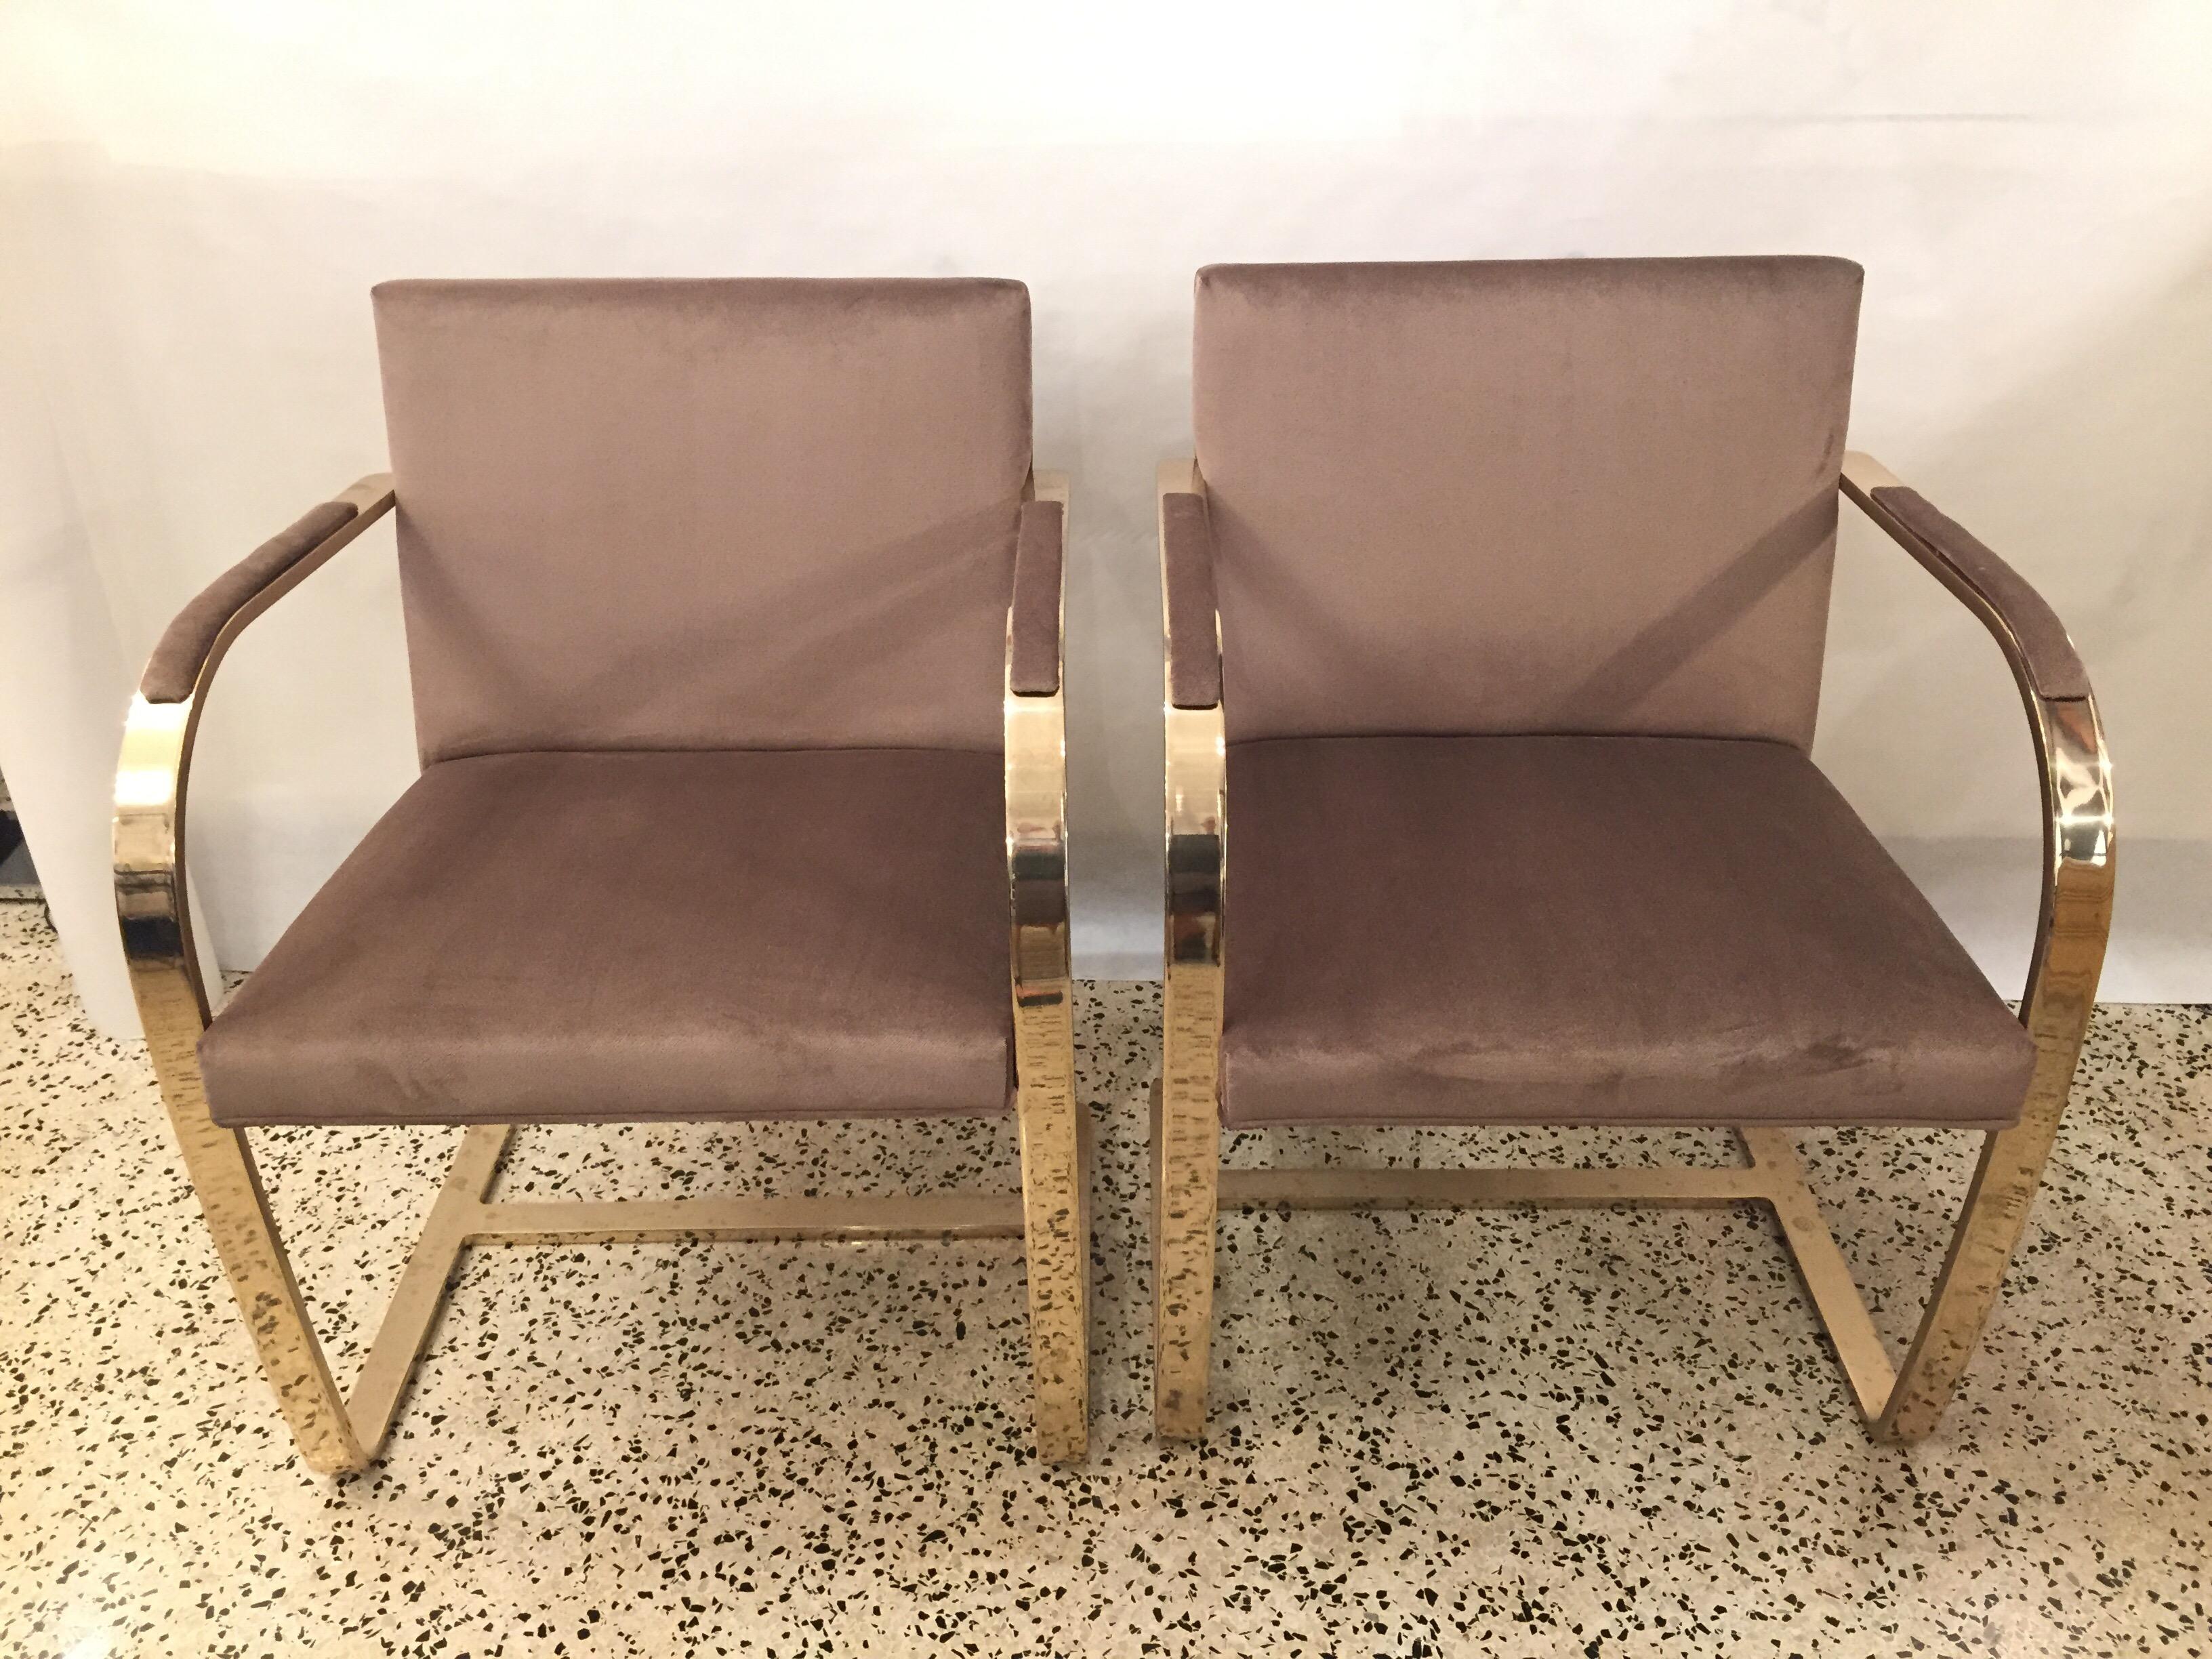 American Ten '10' Vintage Solid Brass Brno Chairs by Ludwig Mies van der Rohe